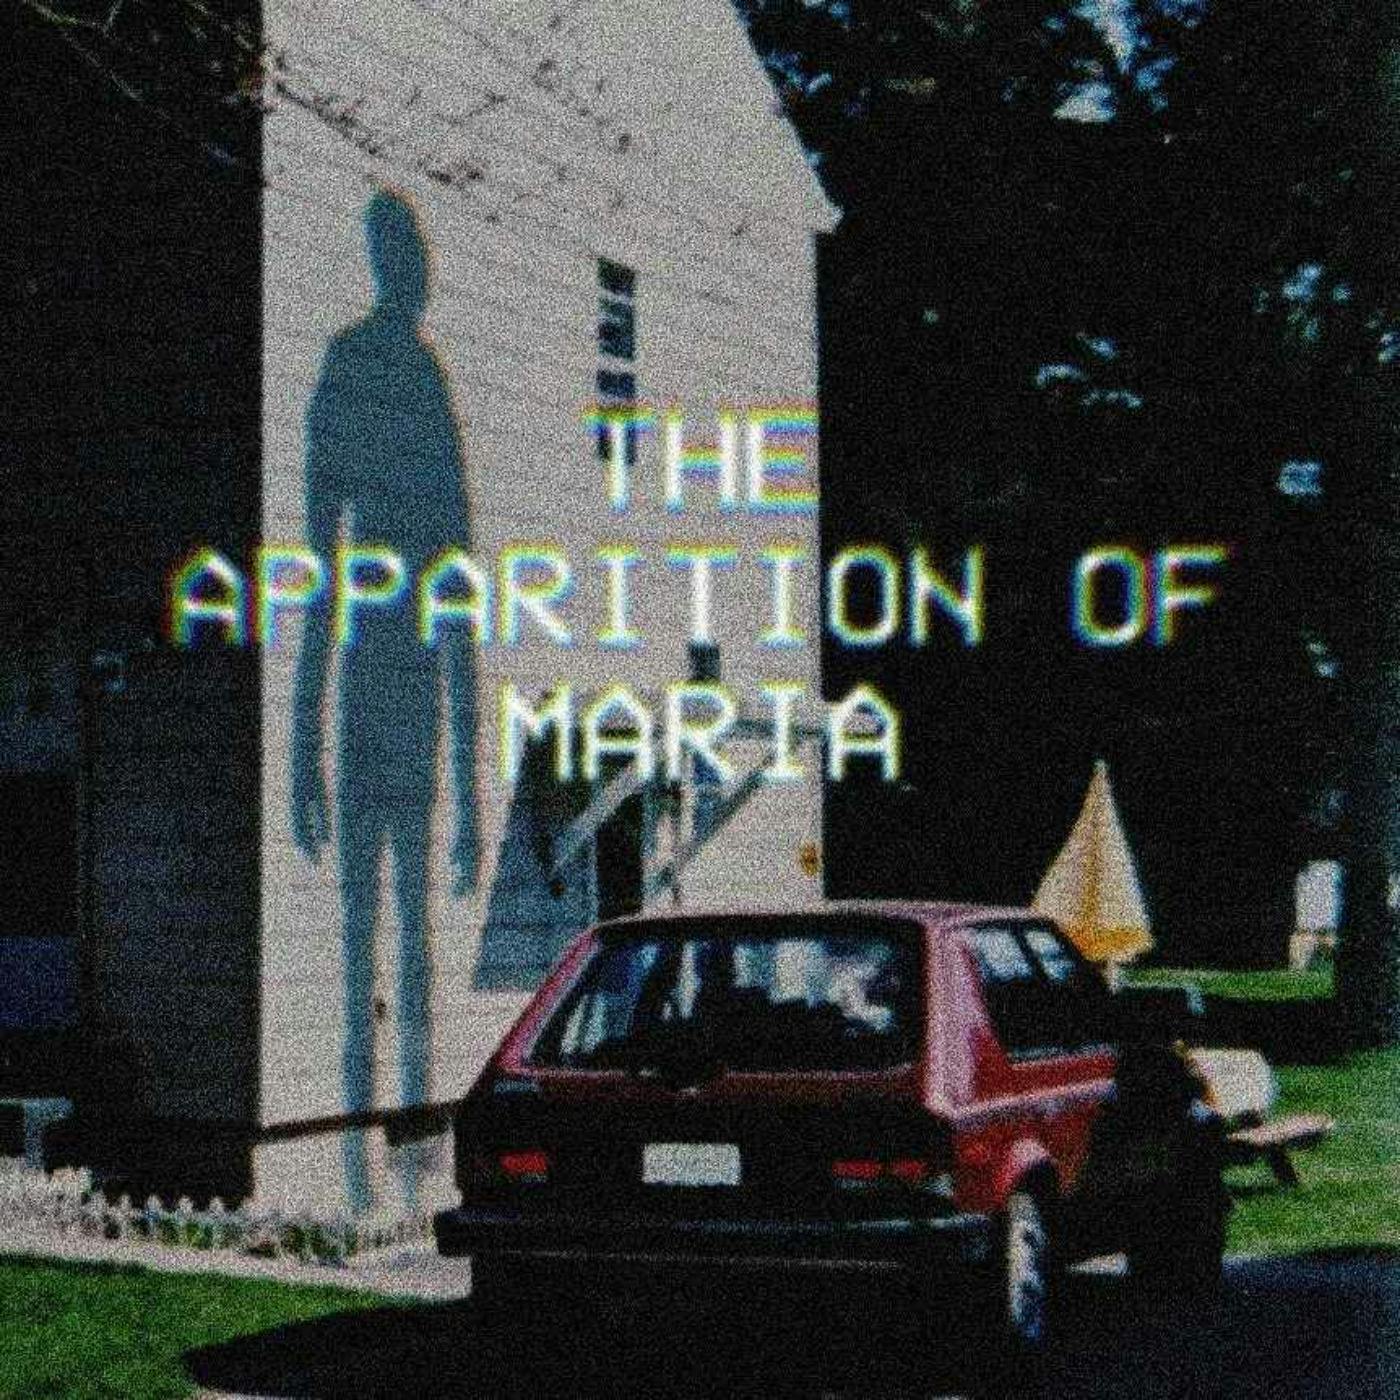 The Apparition of Maria